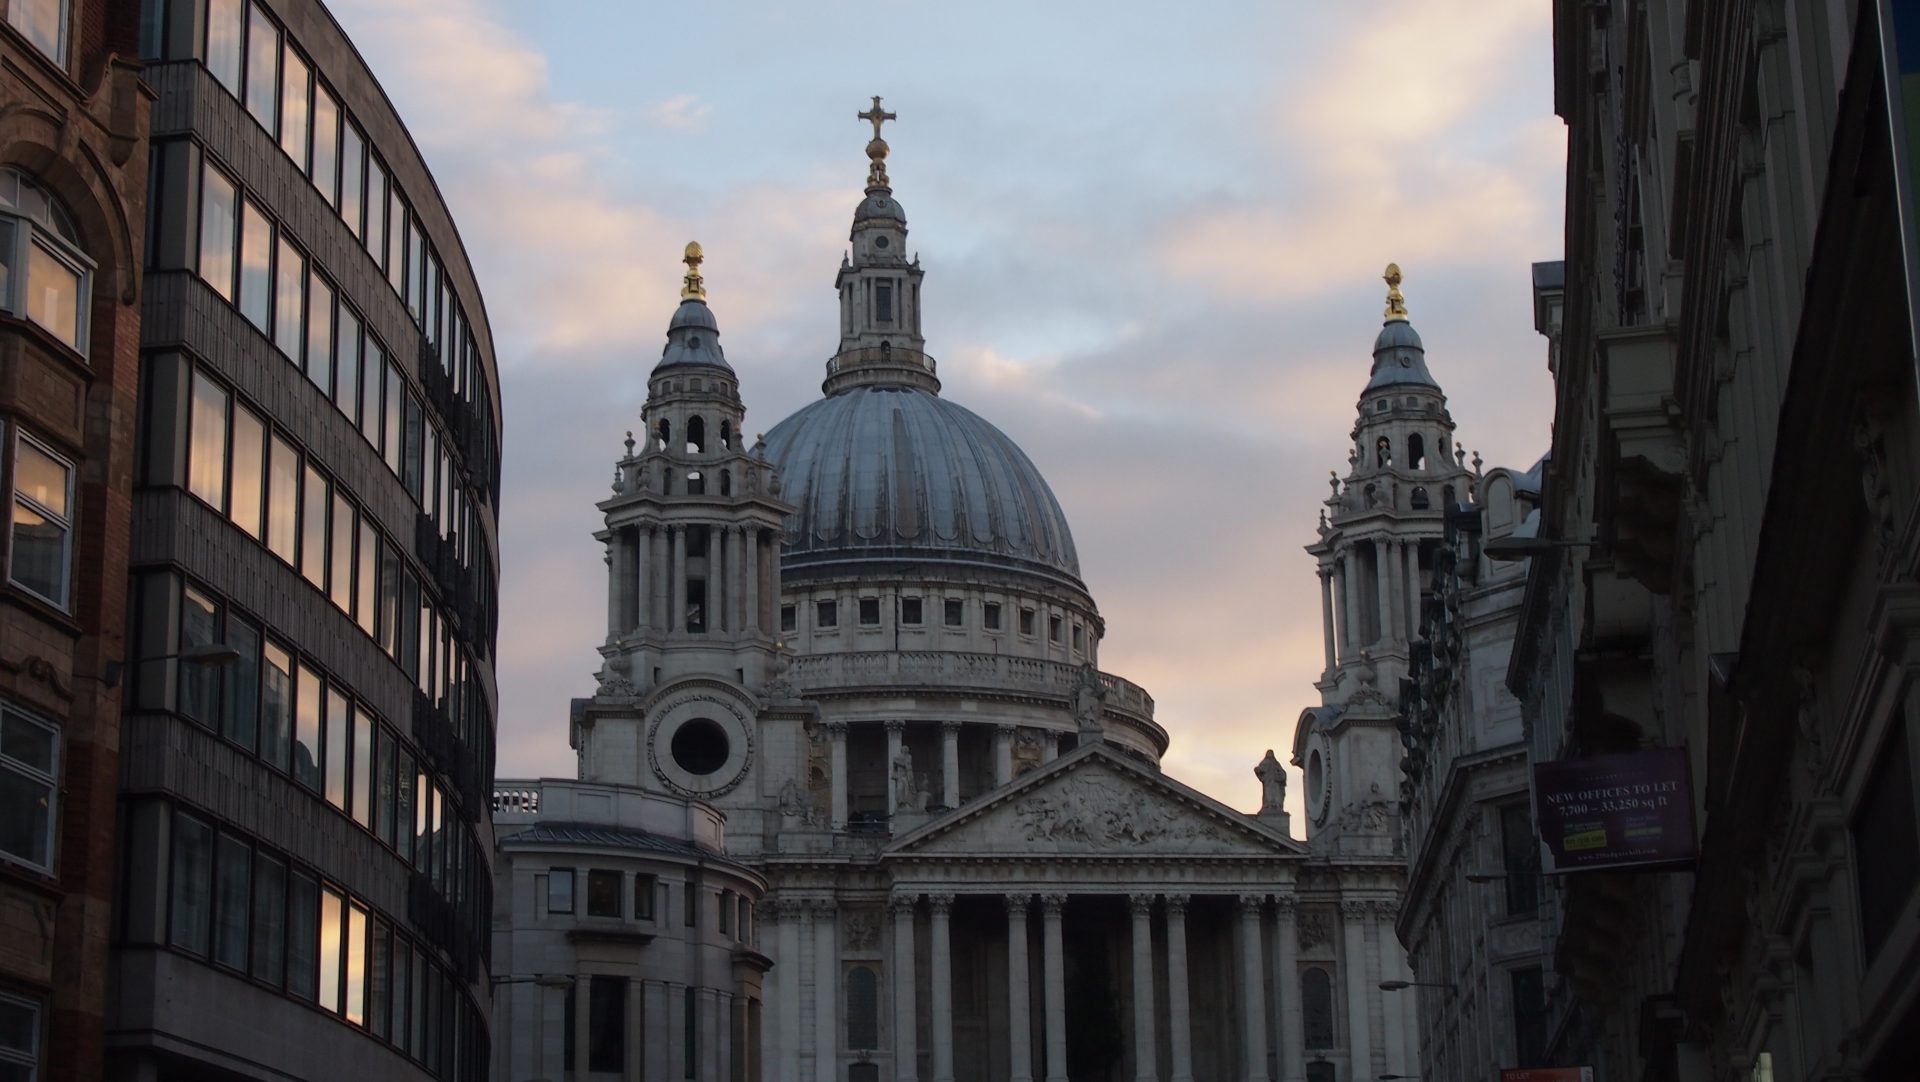 HD wallpaper, Desktop Hd St Pauls Cathedral Background Image, Jolly Good Tours, St, London Highlights